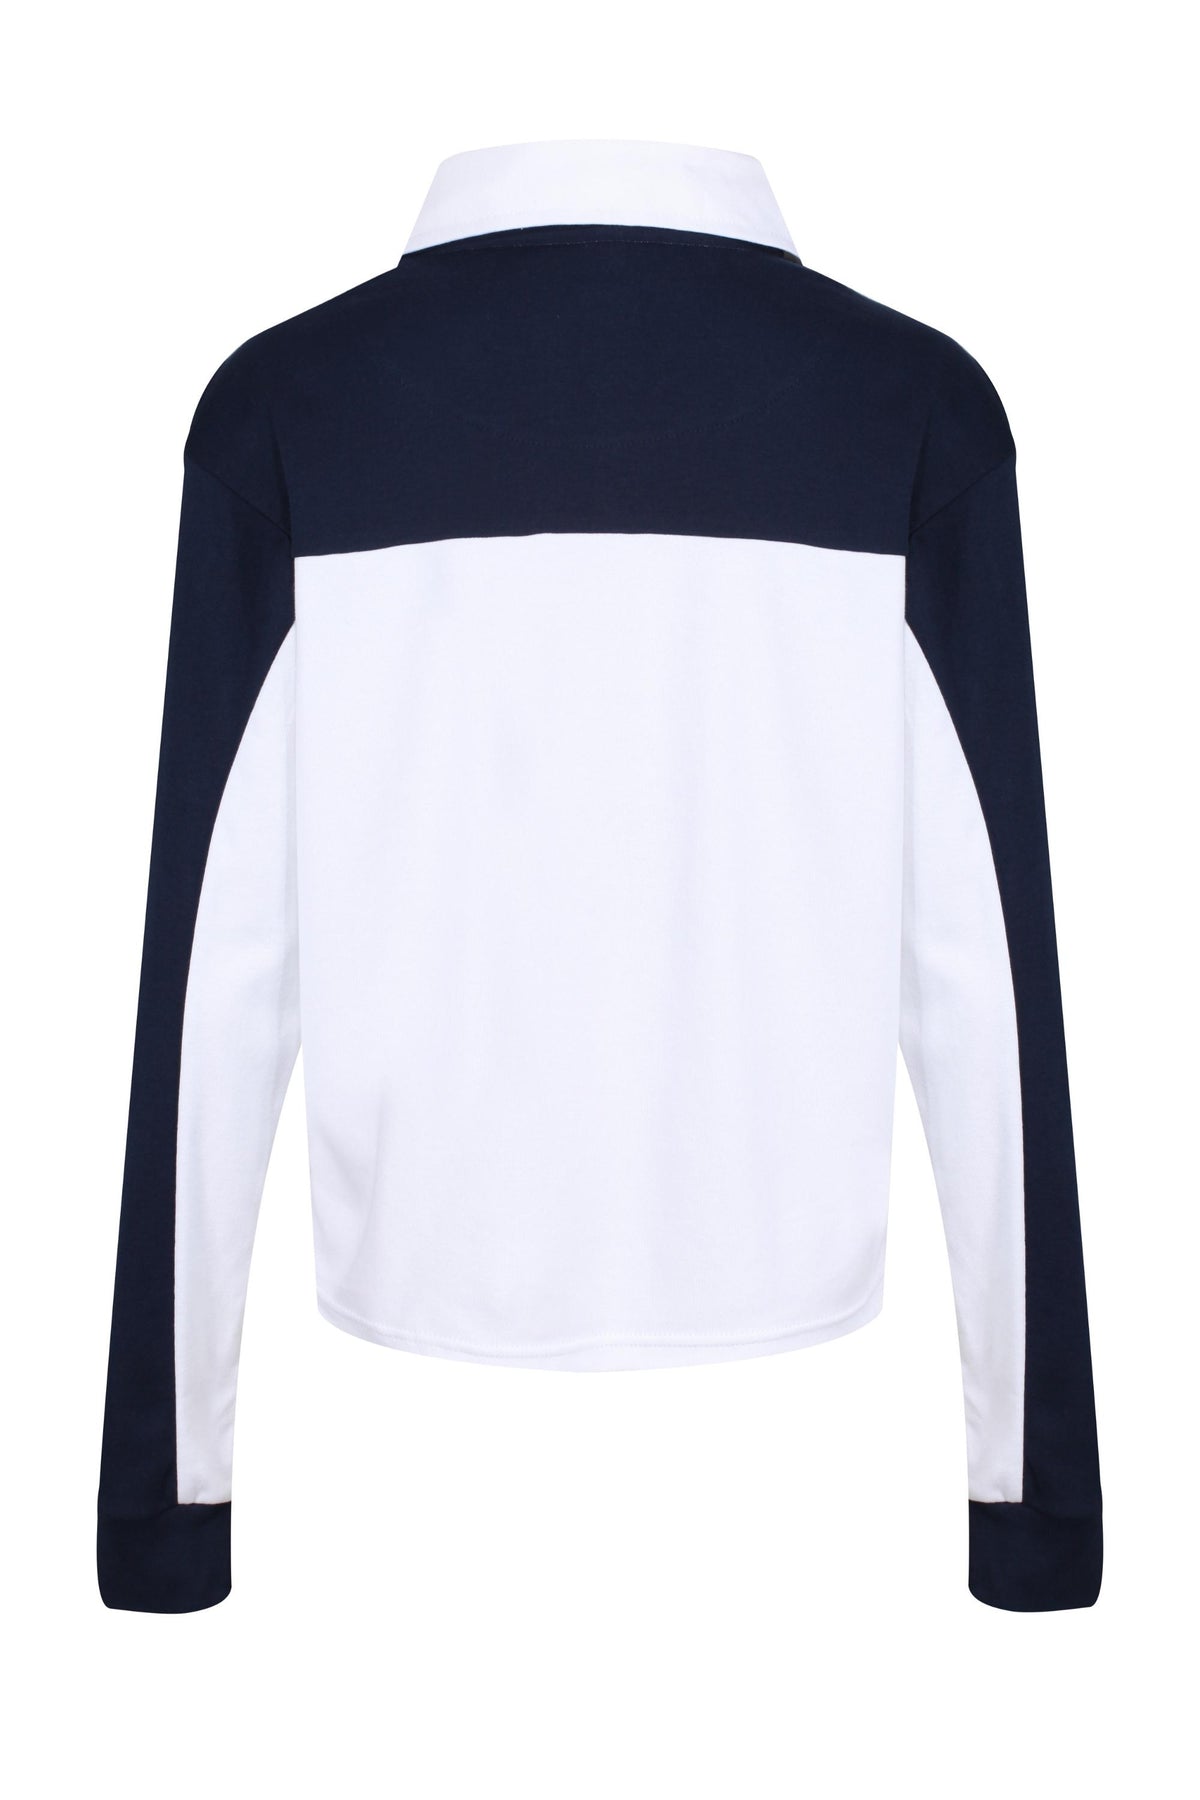 Burford Rugby Shirt - Navy - Whale Of A Time Clothing